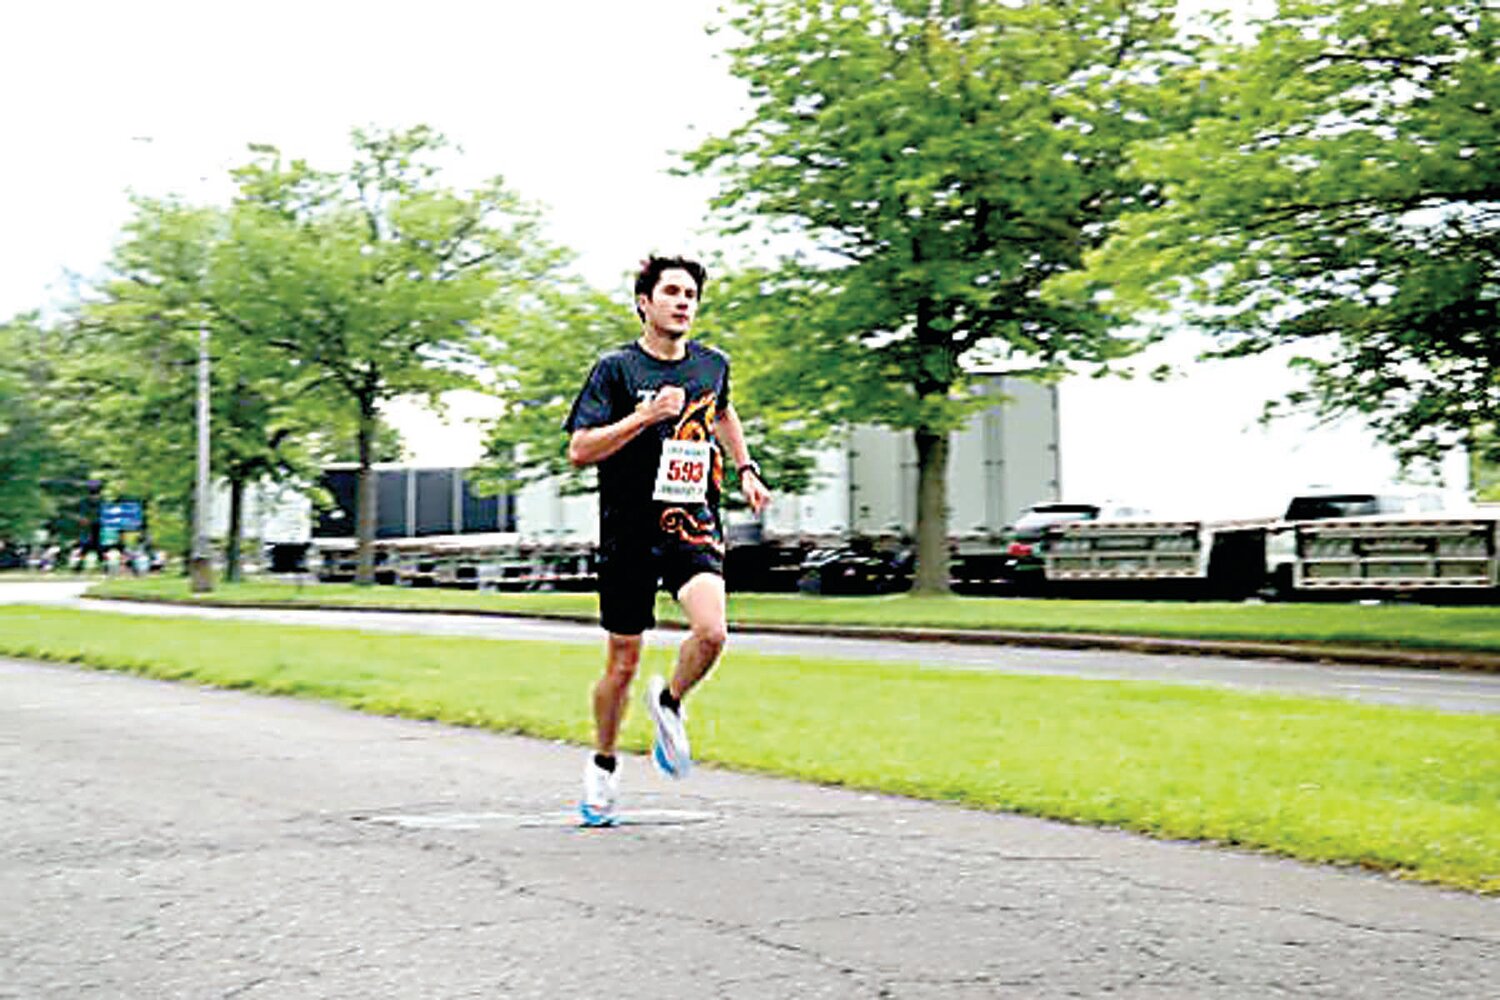 Christopher Baisden, 19, of Bensalem runs on his way to an overall second-place finish (17:20) in Sunday’s 24th annual Kiwanis-Herald Sesame Place Classic 5K in Langhorne.